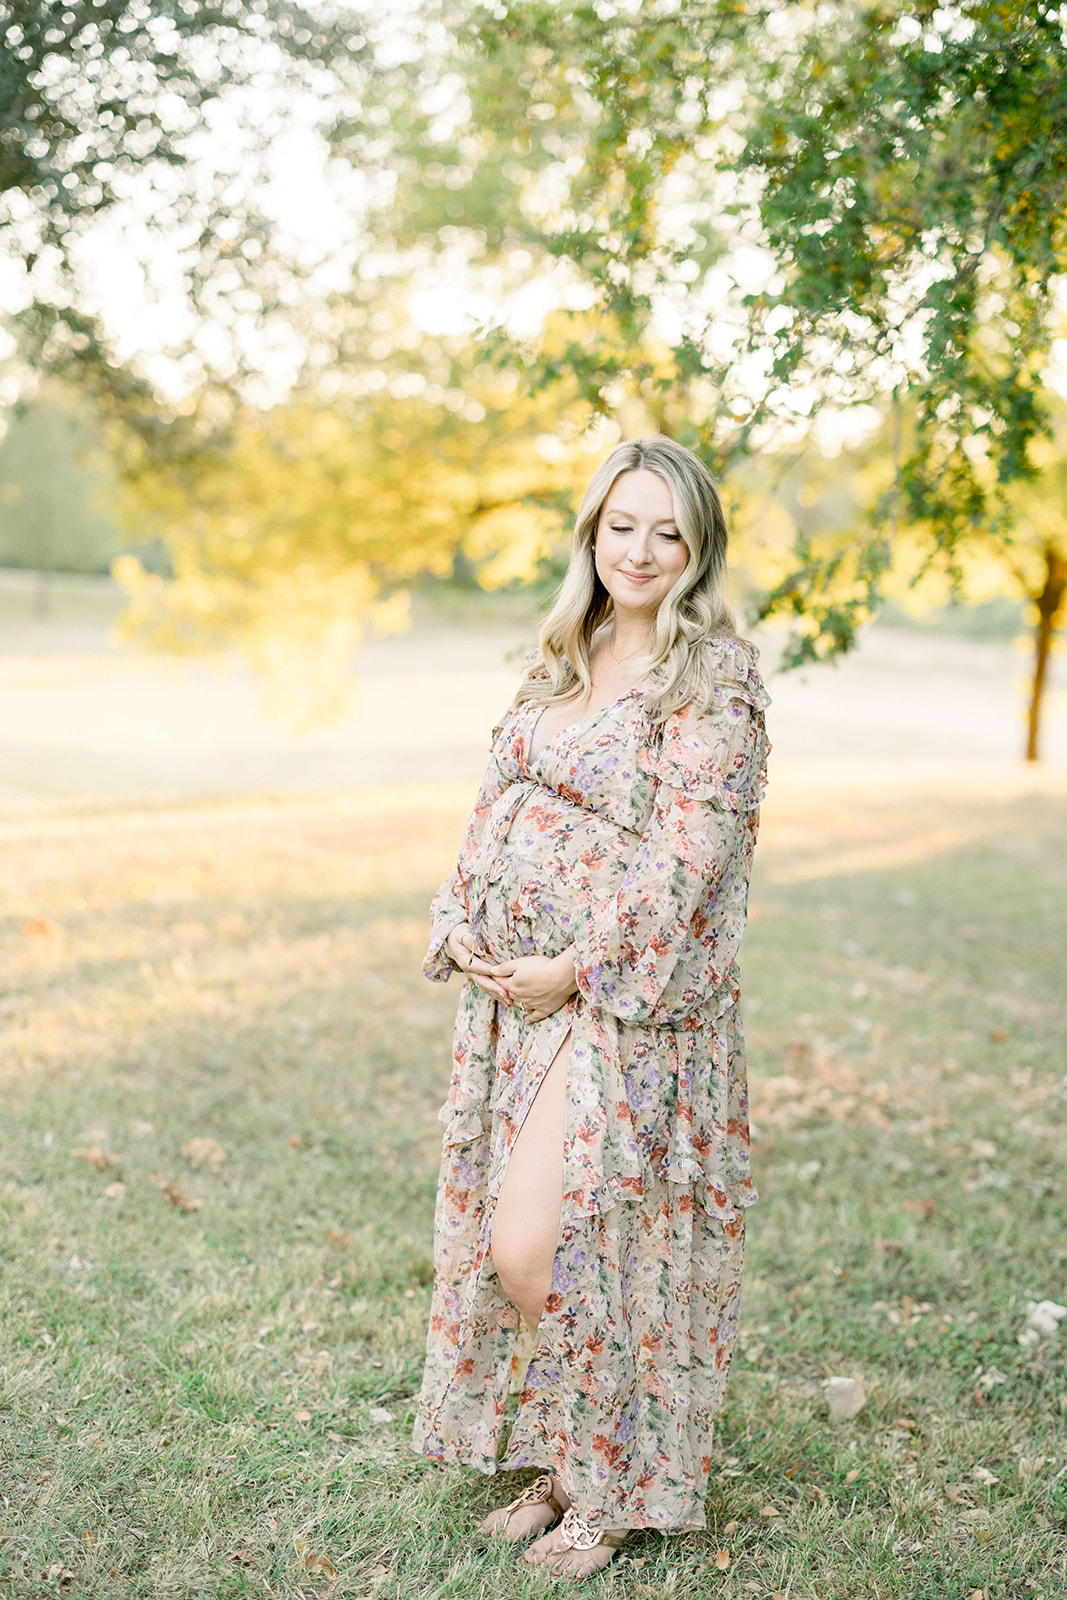 A mother to be in a floral print dress stands in a park lawn at sunset smiling down her shoulder